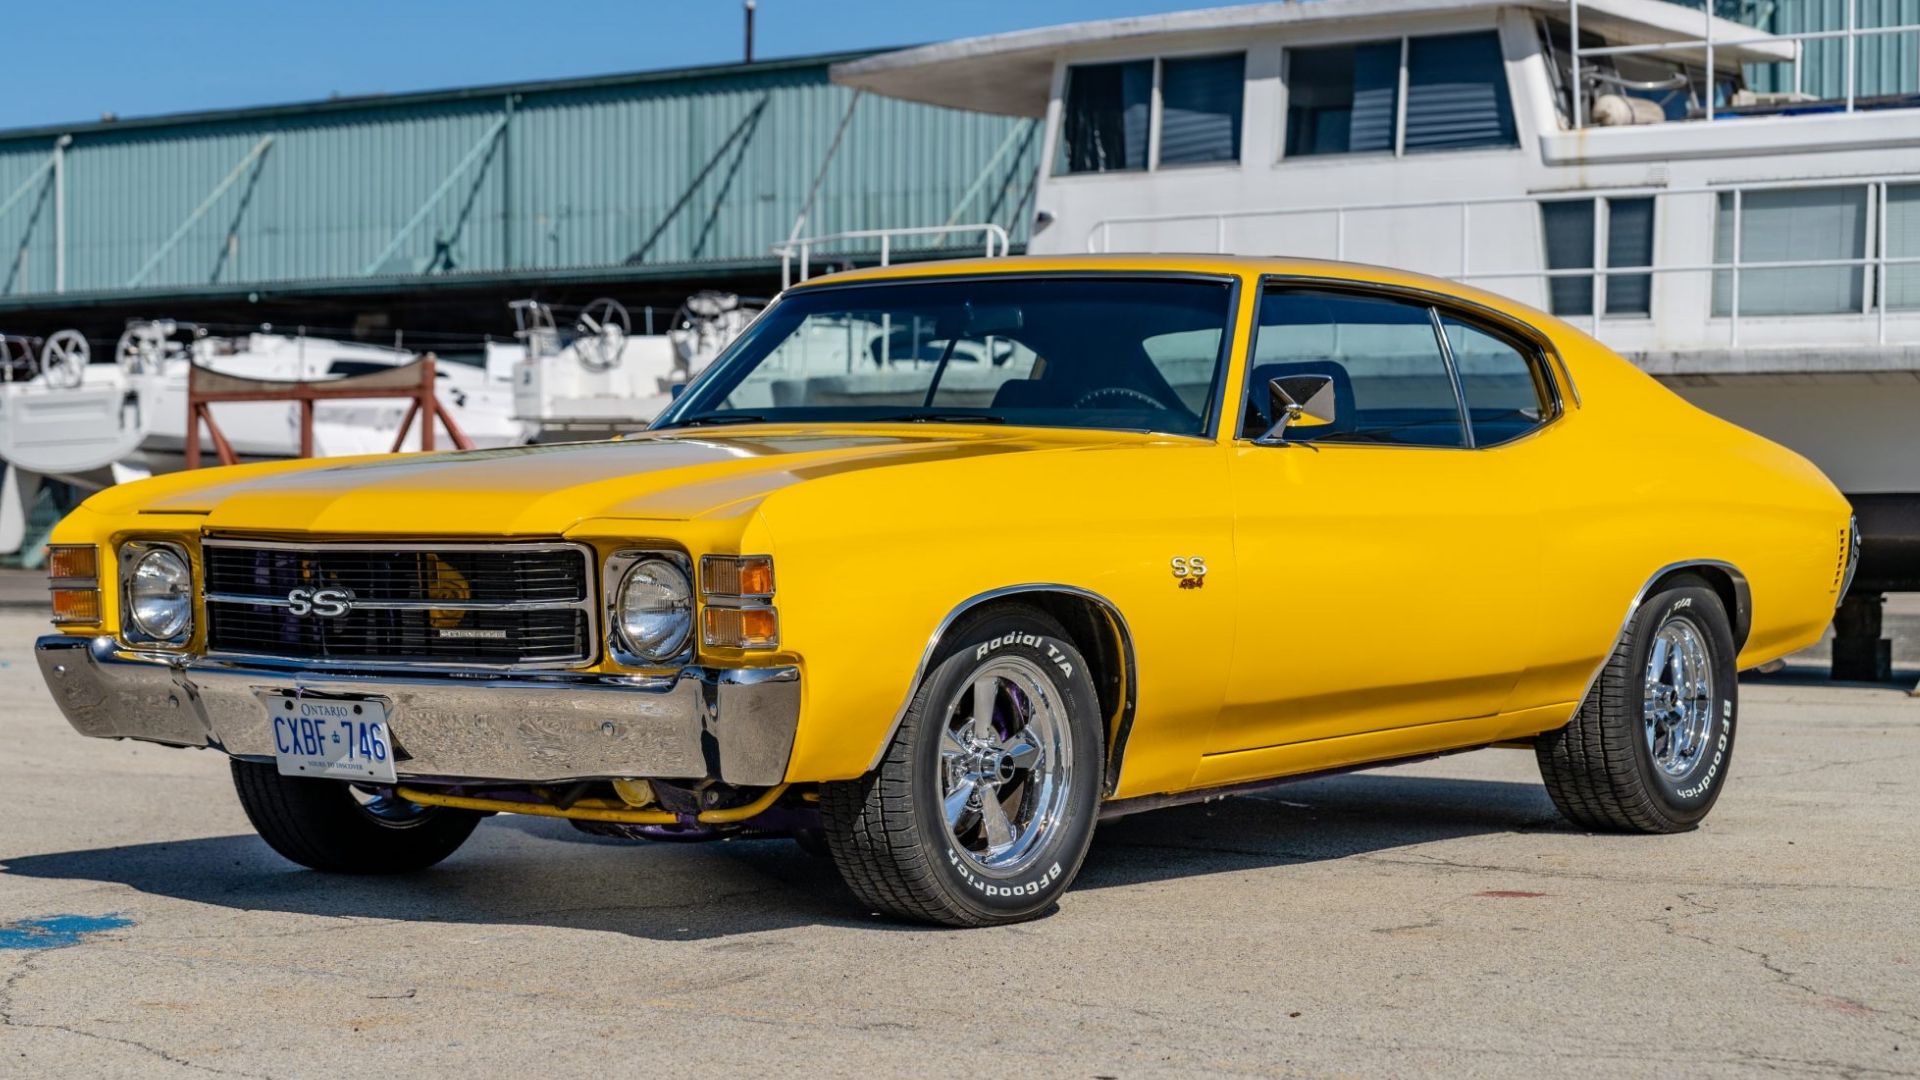 1971 Chevrolet Chevelle SS in yellow front left and side view